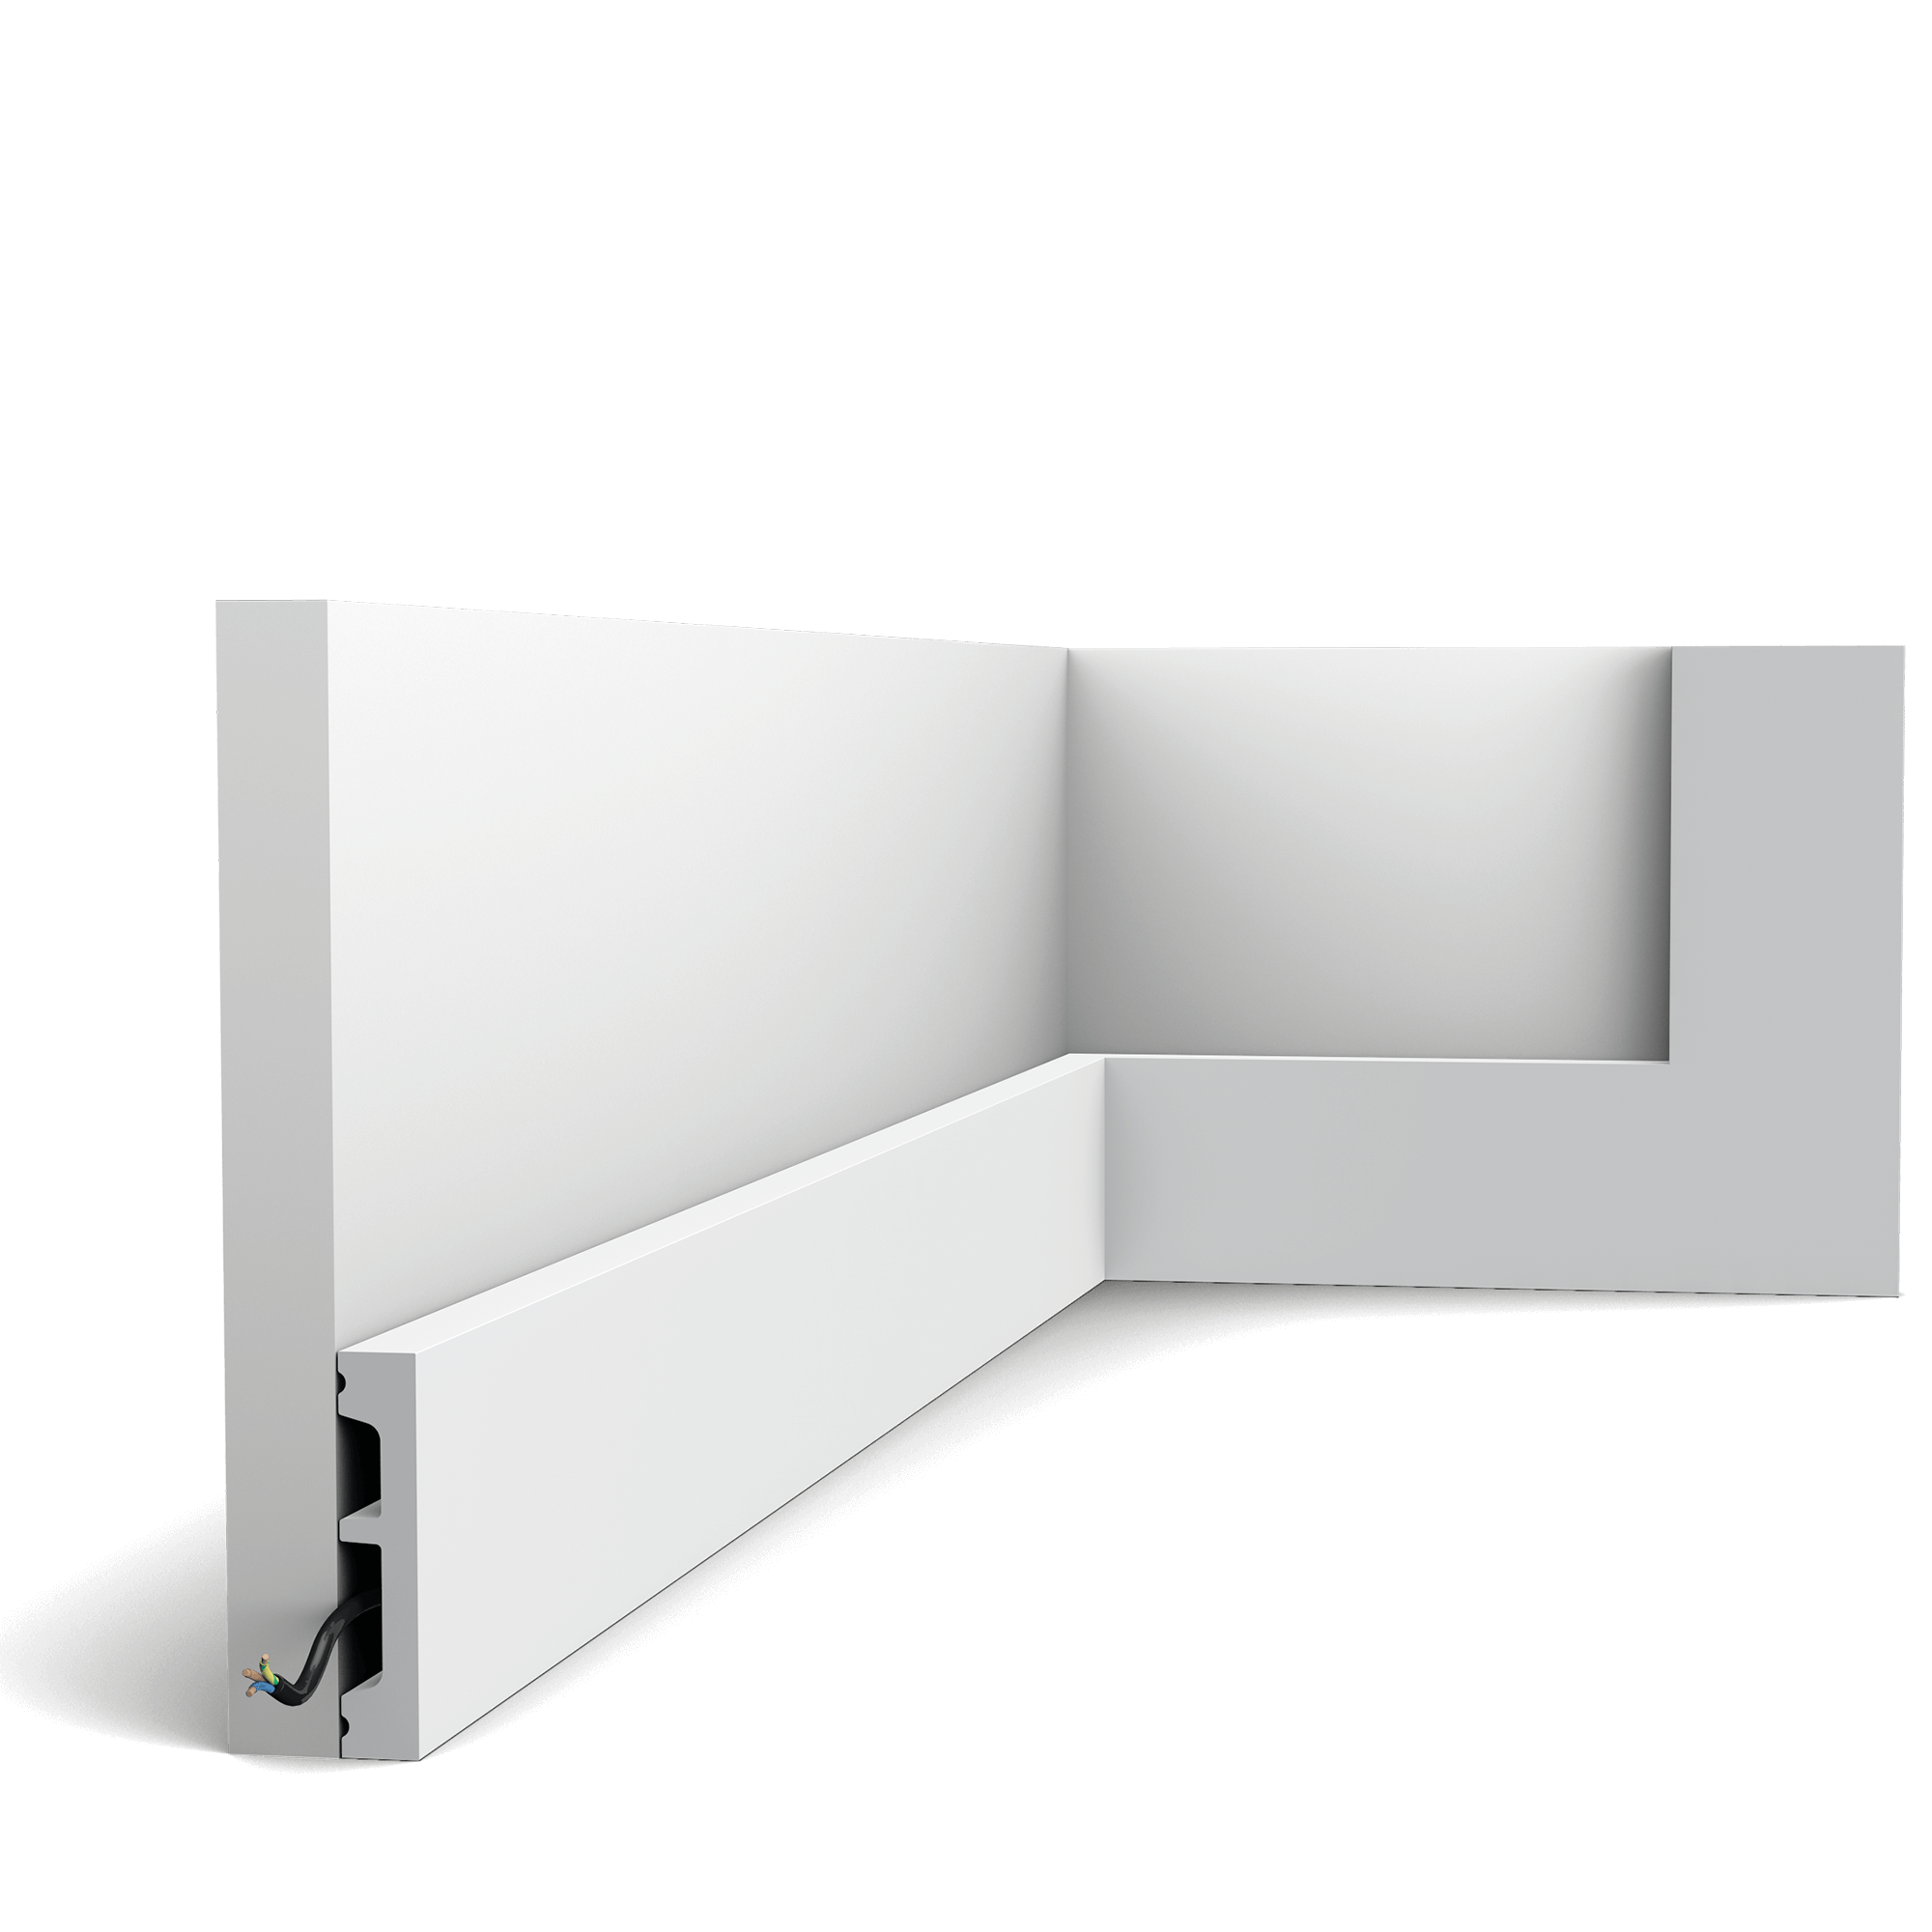 Skirting - NEW - Product finished with RAL9003 Signal white. It is not necessary to repaint this profile after installation. Our simplest skirting board is part of the SQUARE family. Use this multifunctional profile to fit your entire home with the same skirting board. All you need to do is select the correct size to fit your space.